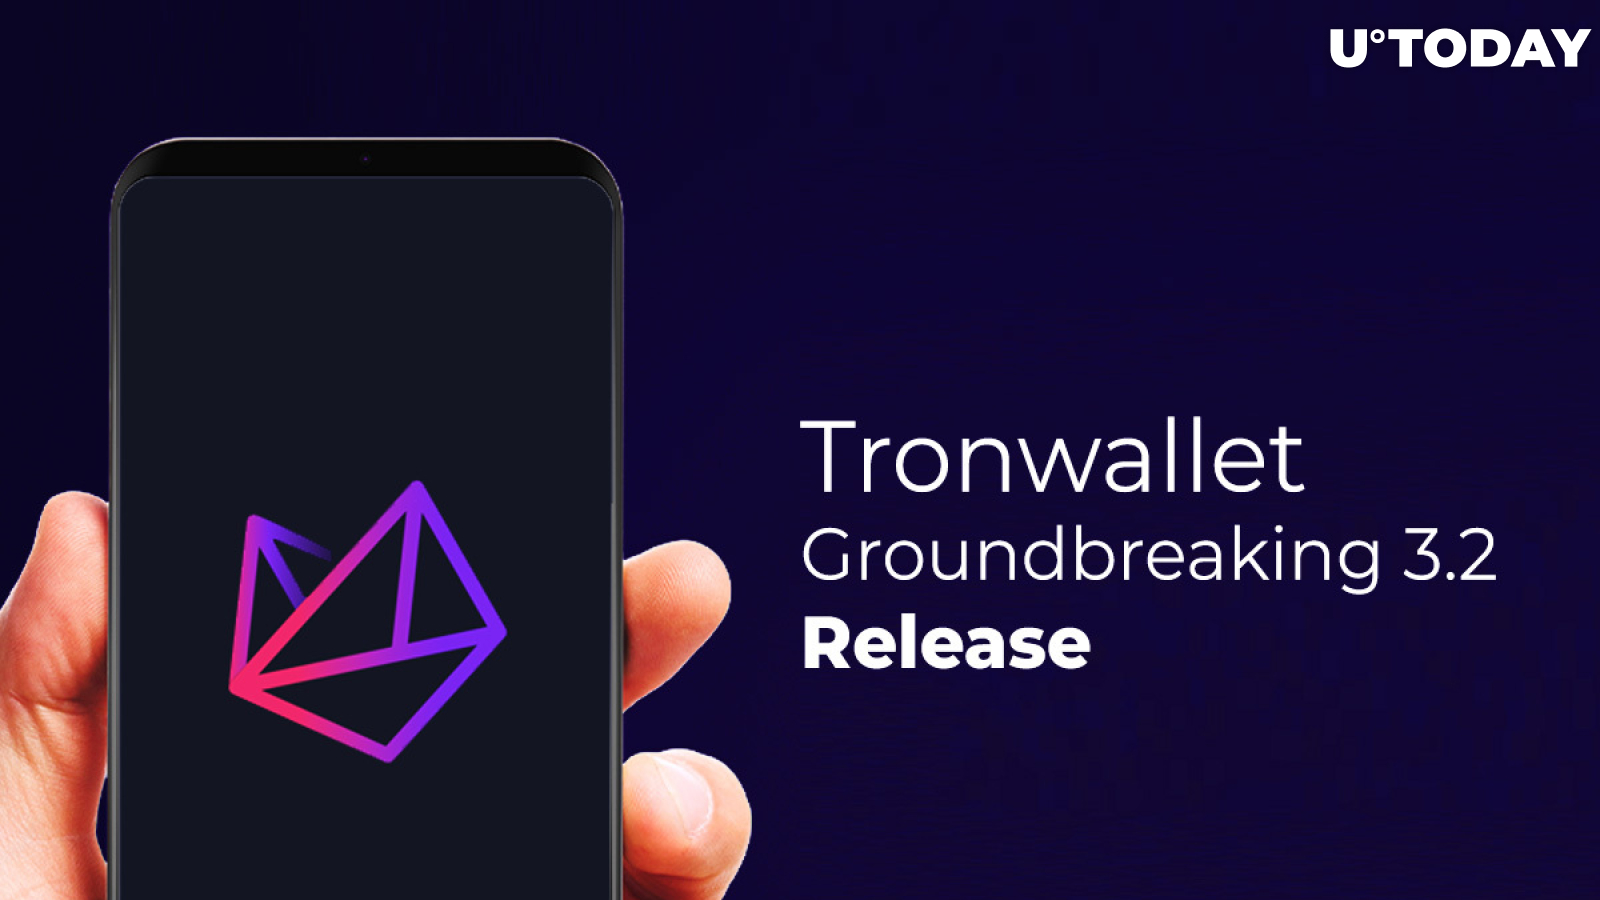 TronWallet Rolls Out 3.2 Version with Ethereum (ETH) Swaps, Multiple Accounts, and Other Features